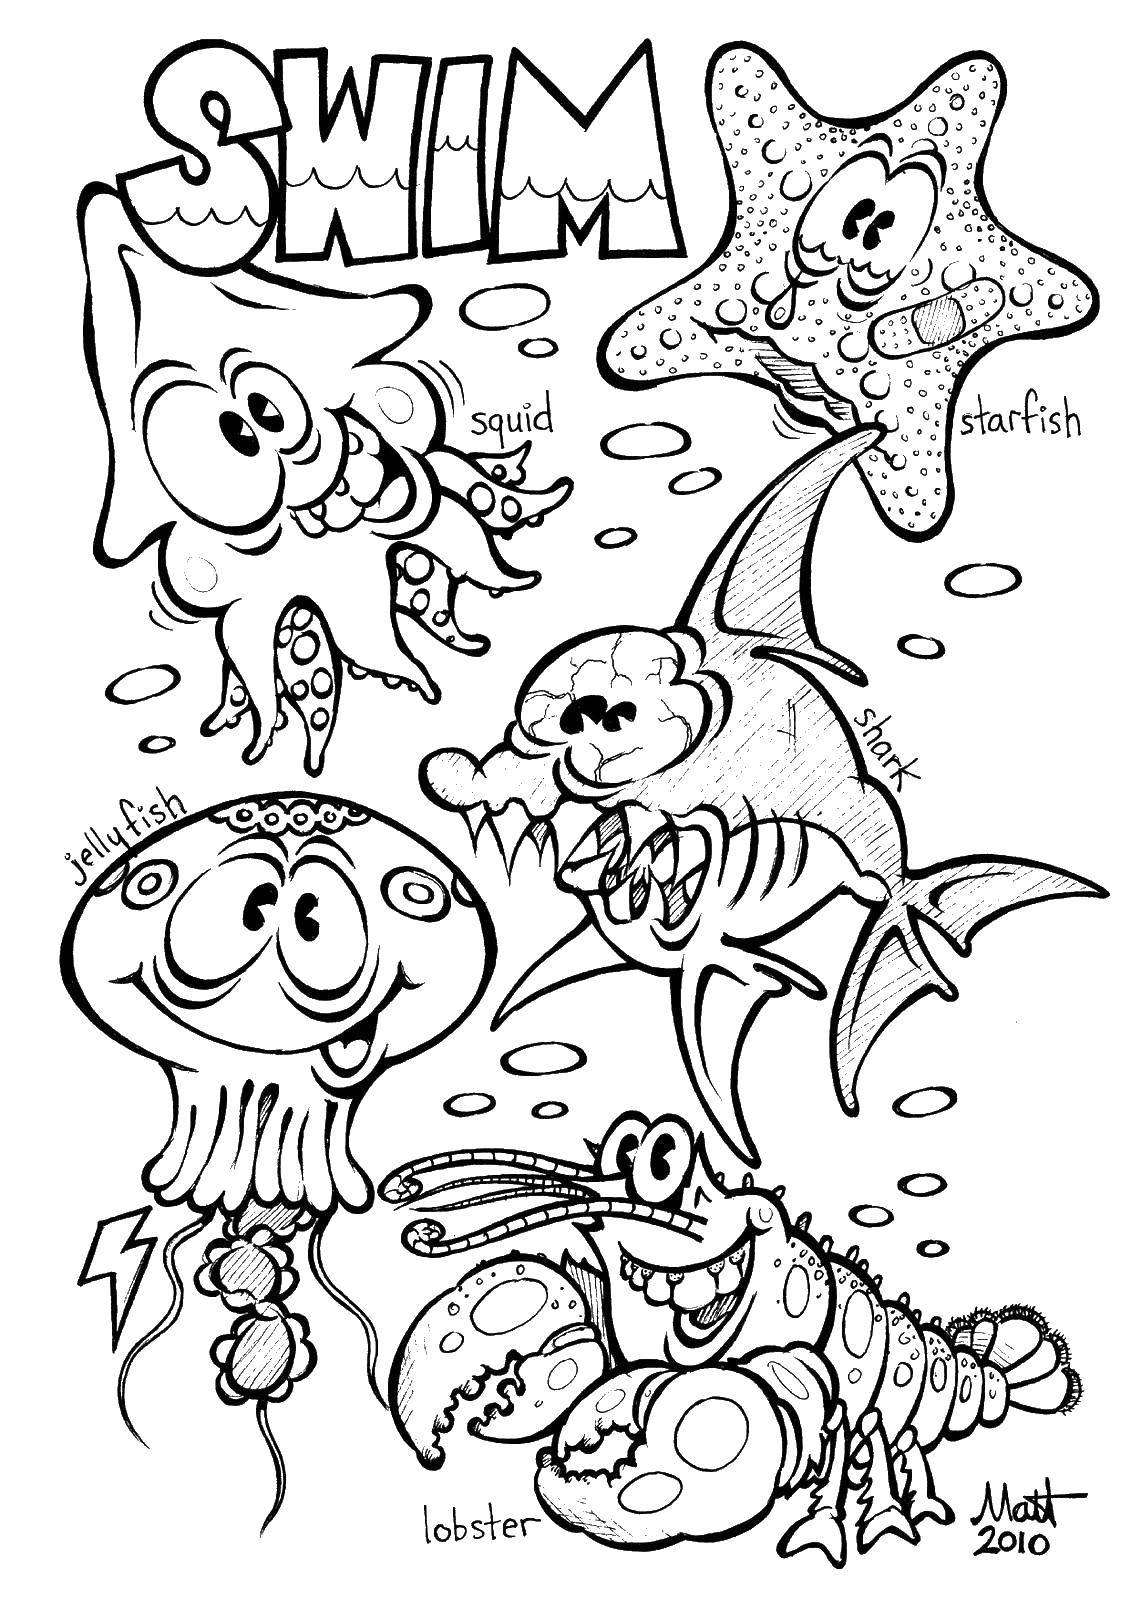 Coloring Different sea creatures. Category marine. Tags:  marine, sea, fish, animals.